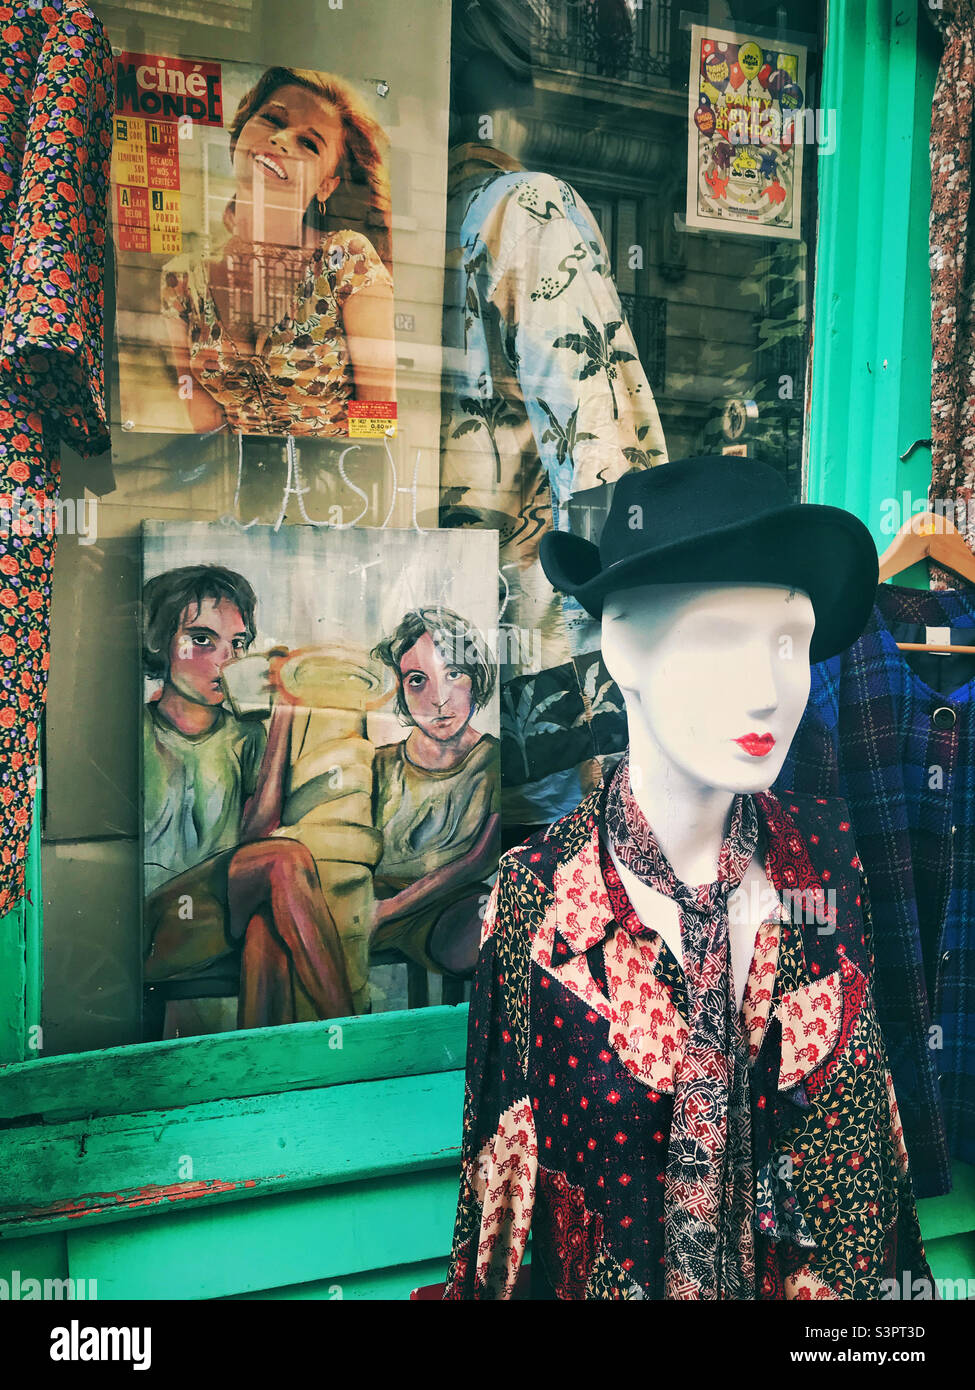 A typical vintage clothing store in Paris, France Stock Photo